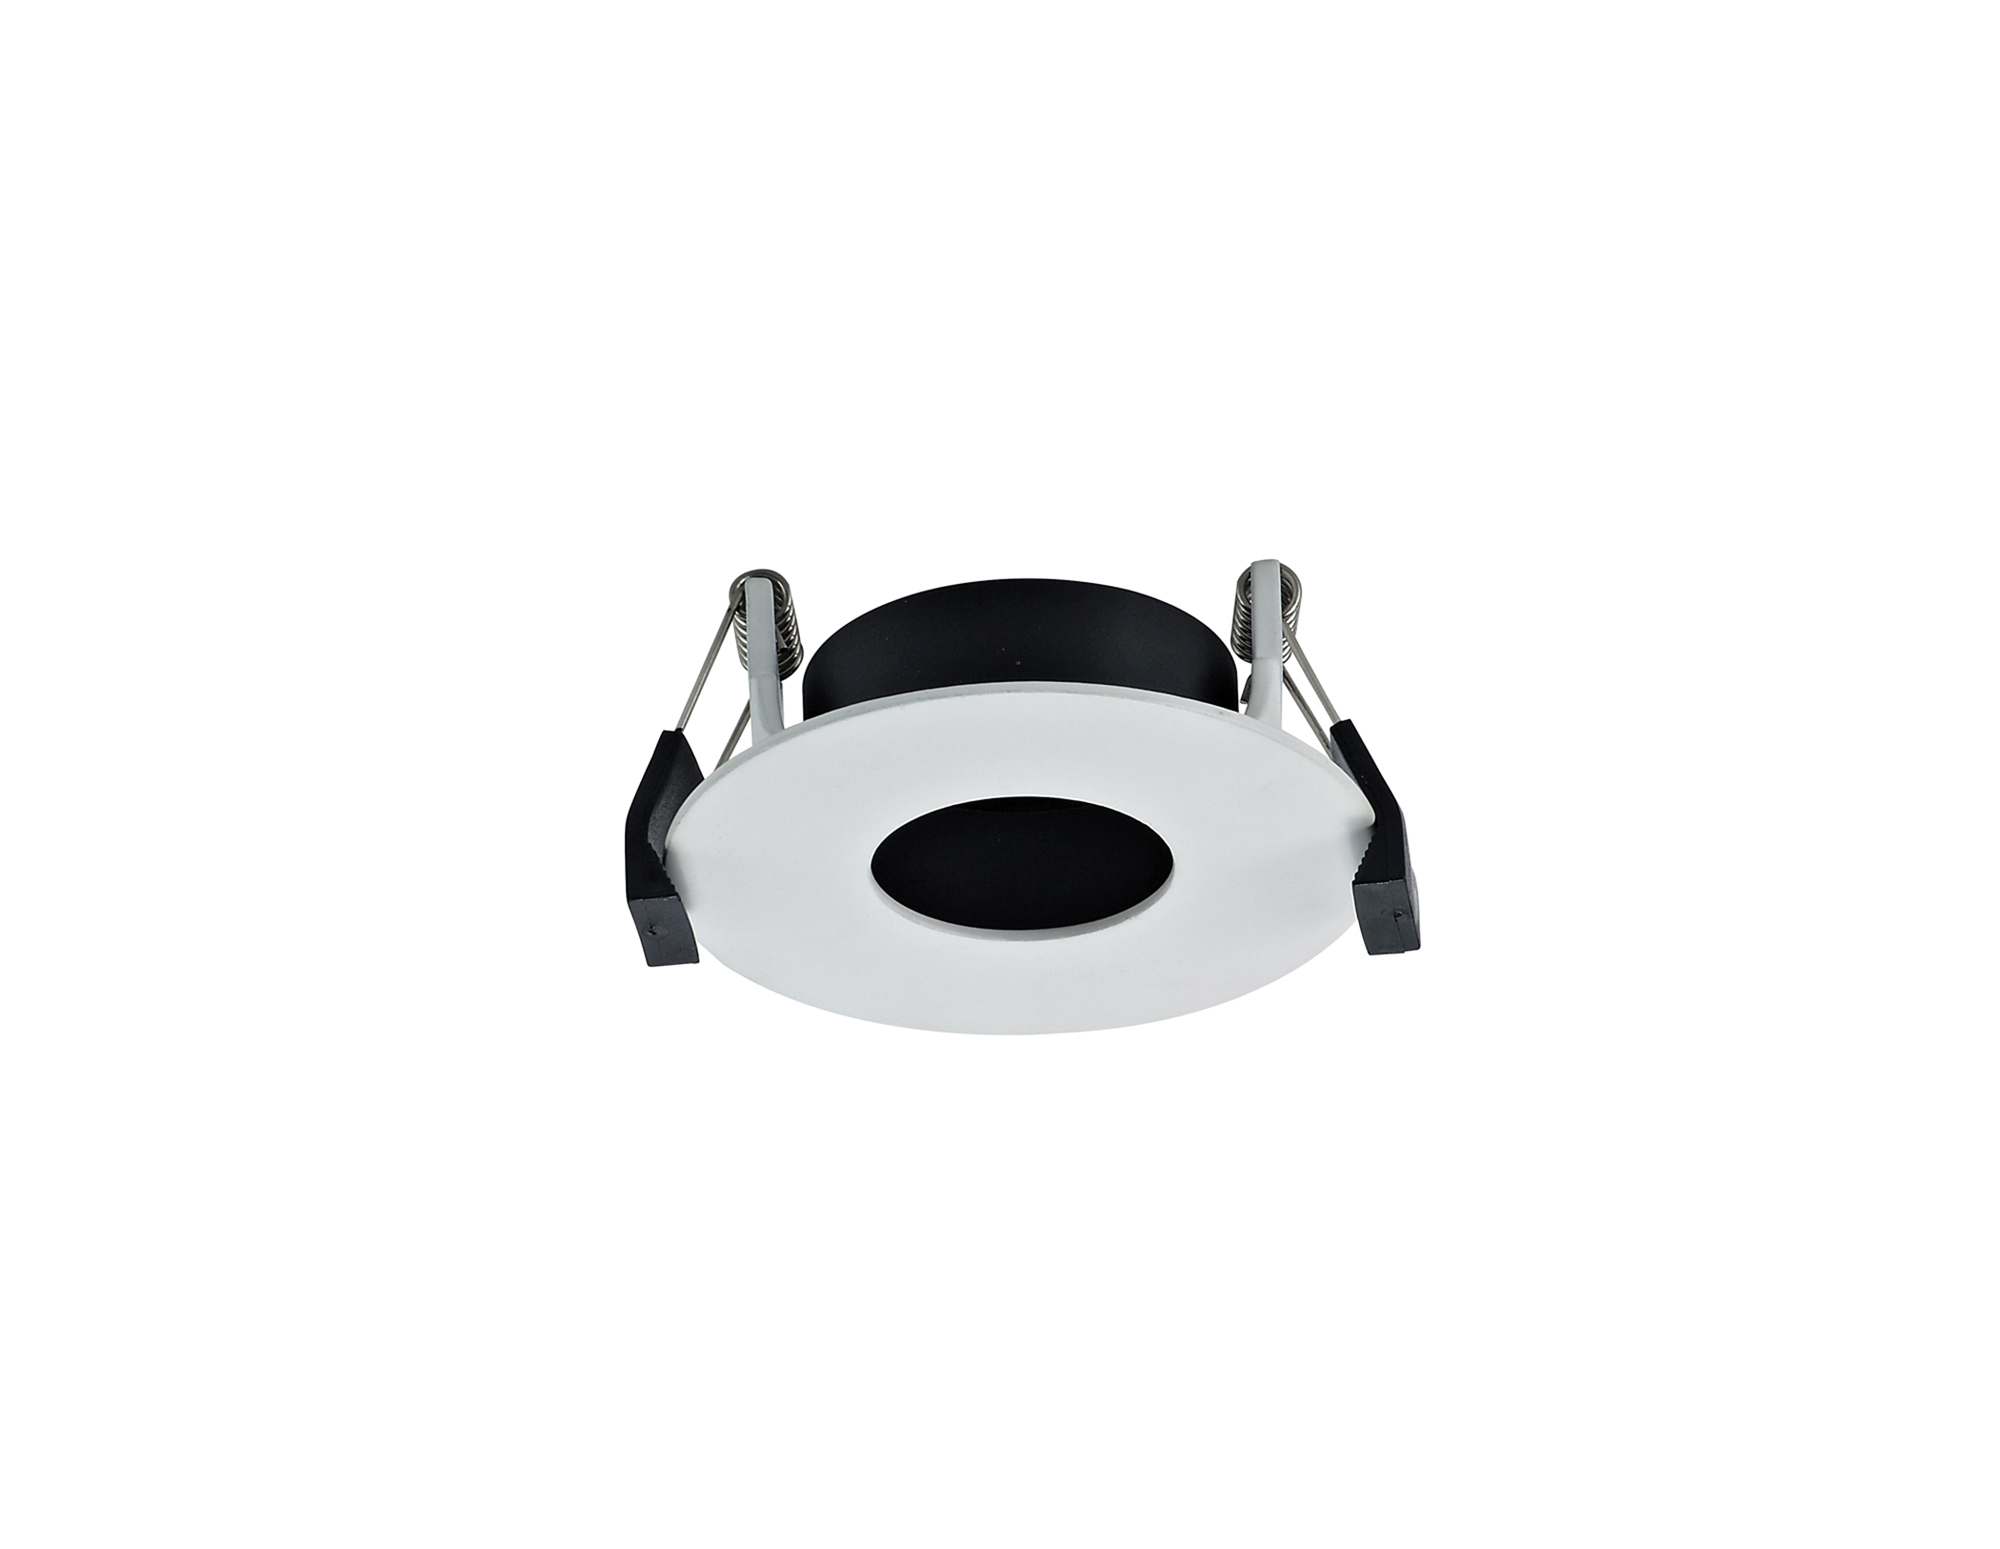 DX200364  Blate; White Recessed Round Plate with Round Pinhole Spotlight - LED ENGINE REQUIRED; Dia: 85mm; Cut Out: 76mm; 3yrs Warranty